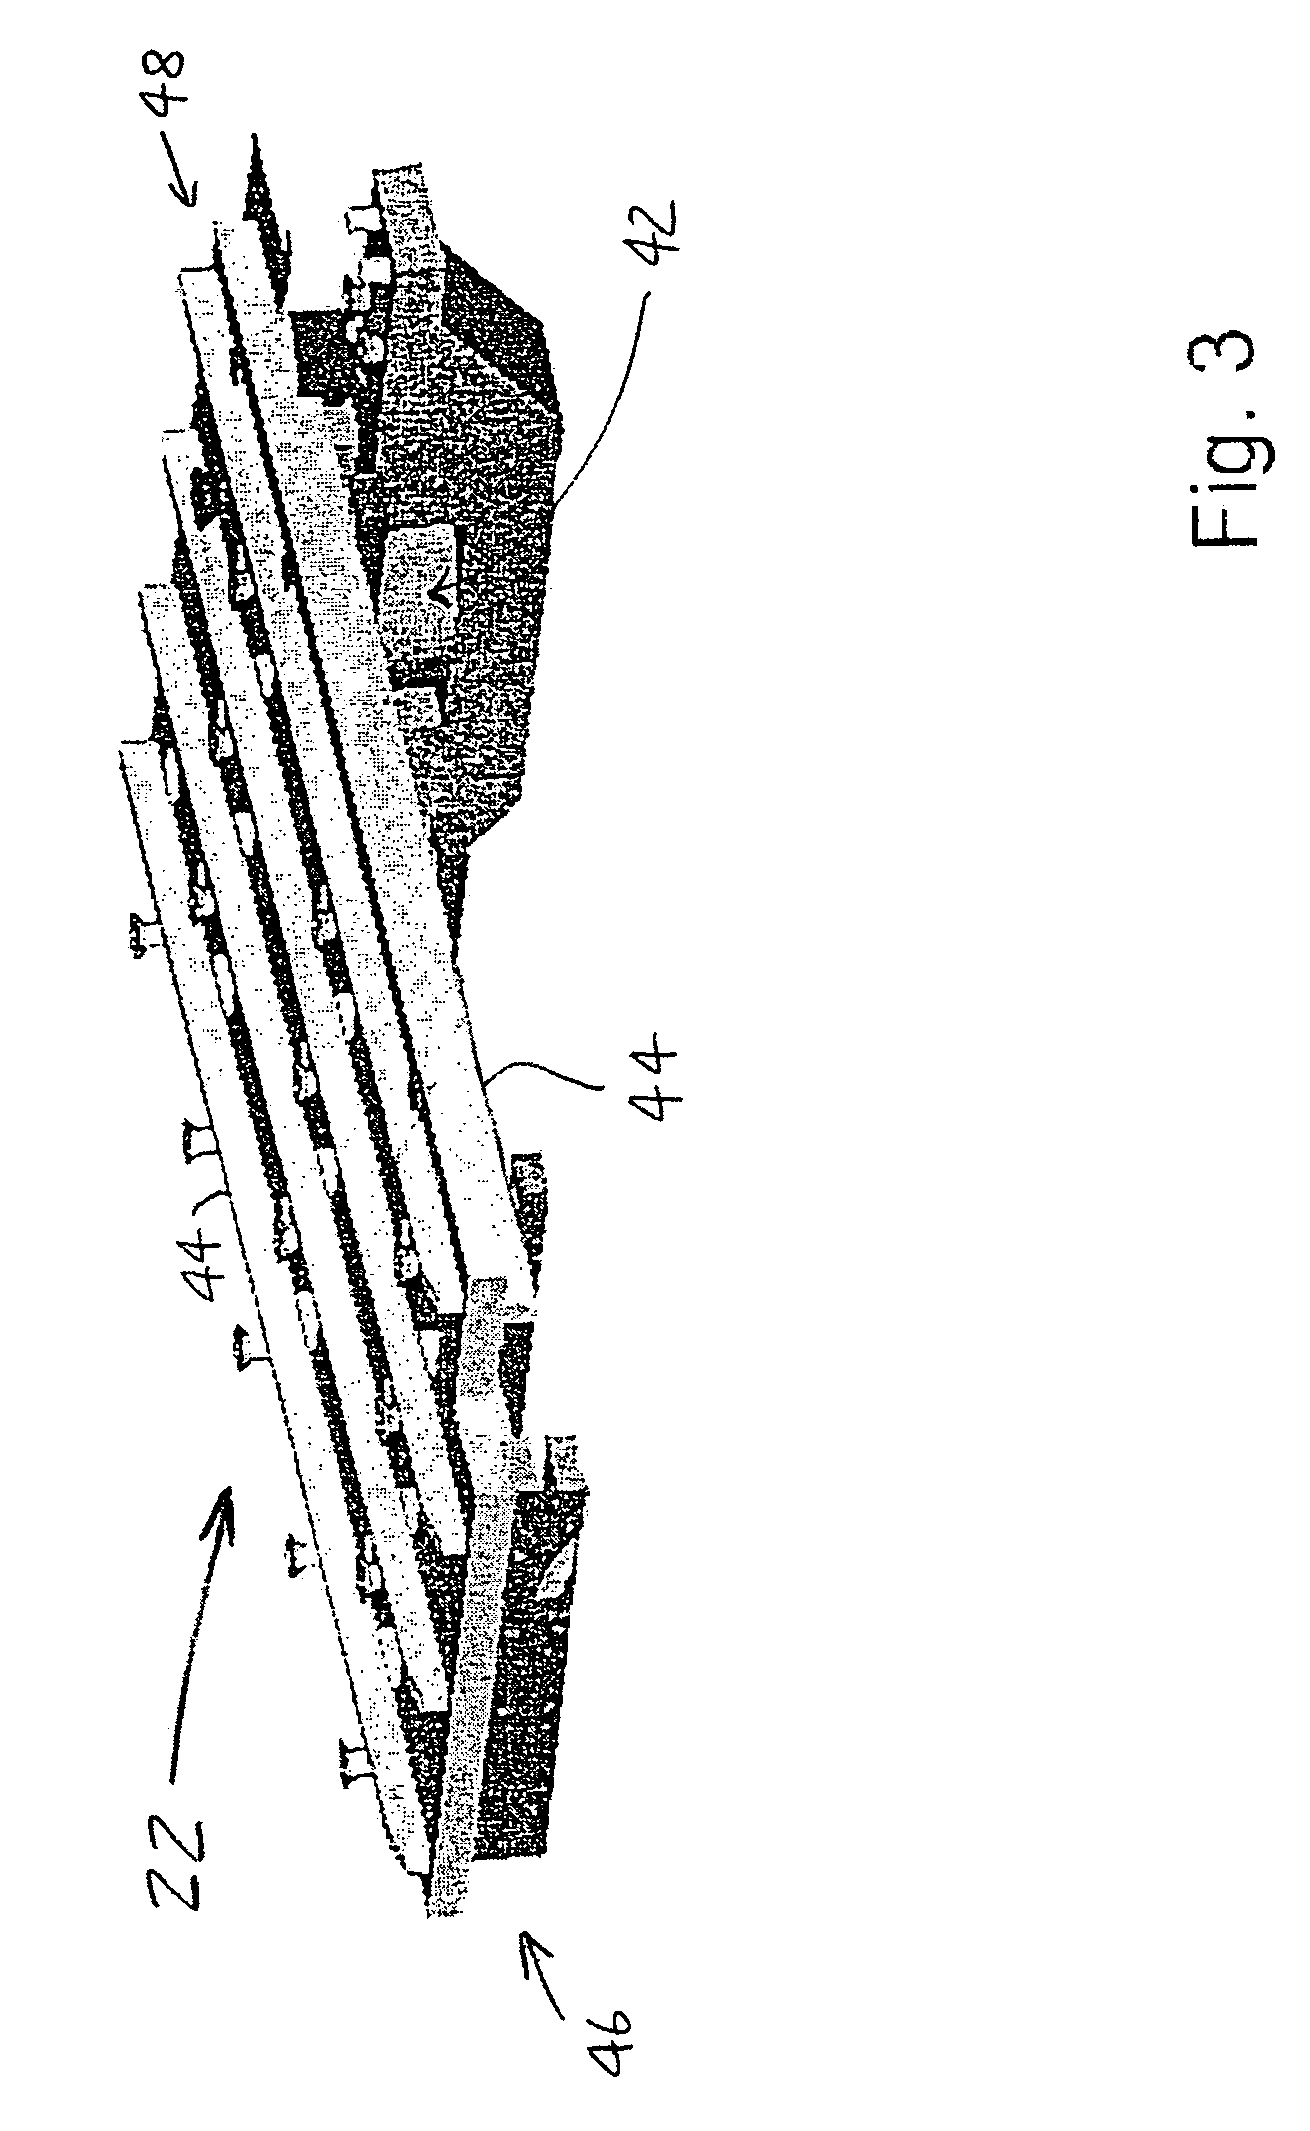 System for feeding and transporting documents